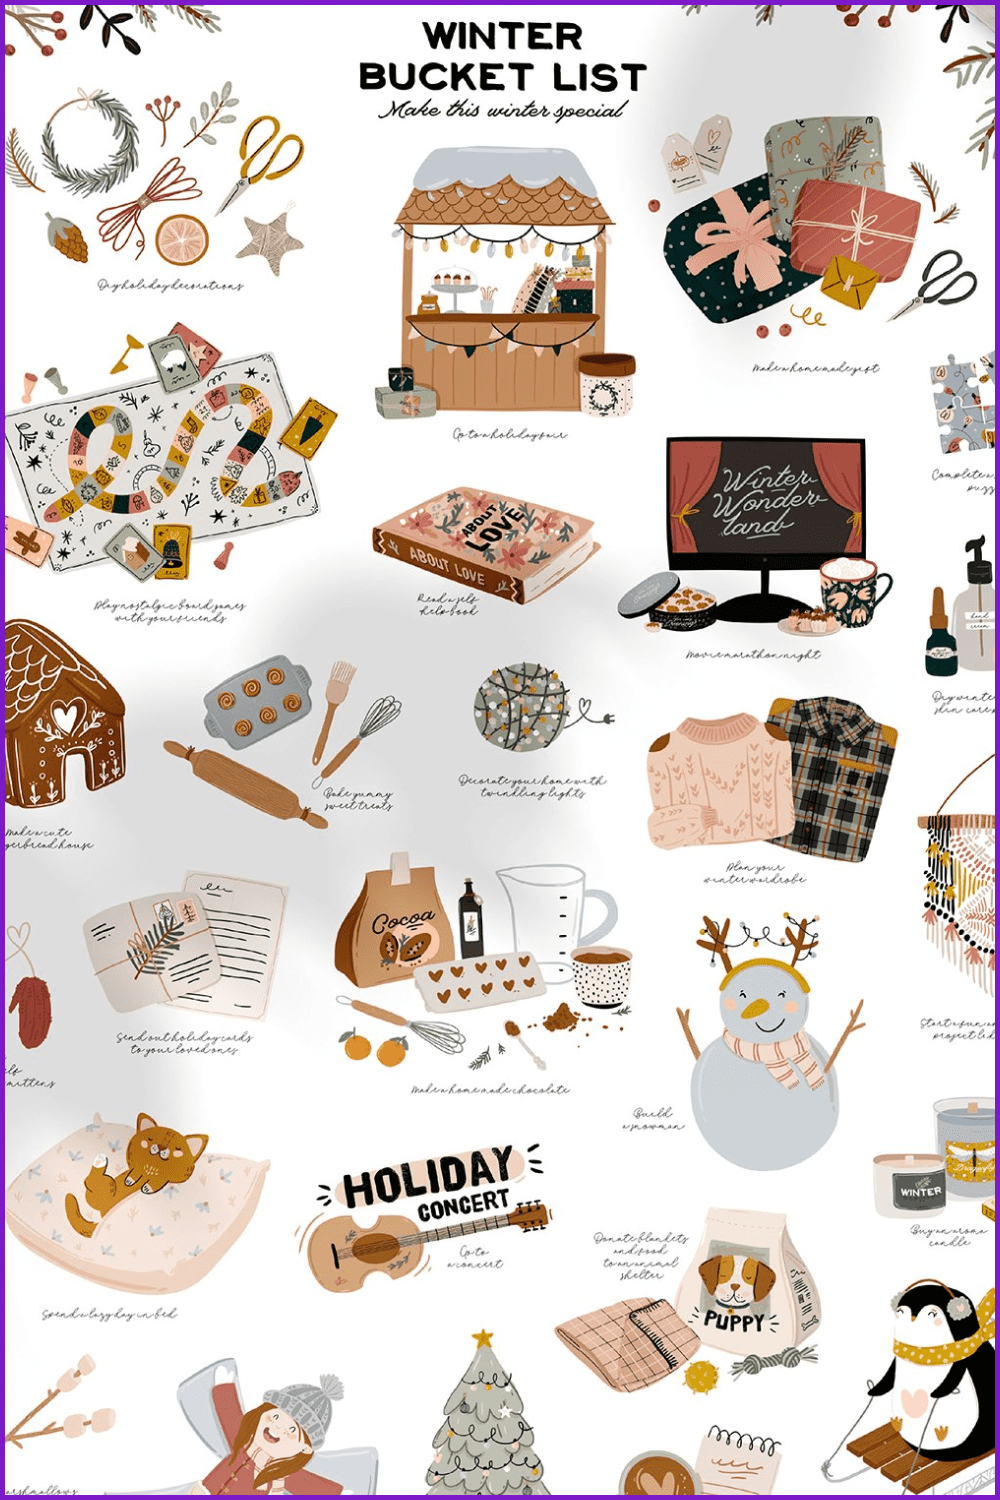 Collage with kitchen stuff, cakes, sweaters, gloves, candles, cookie houses.